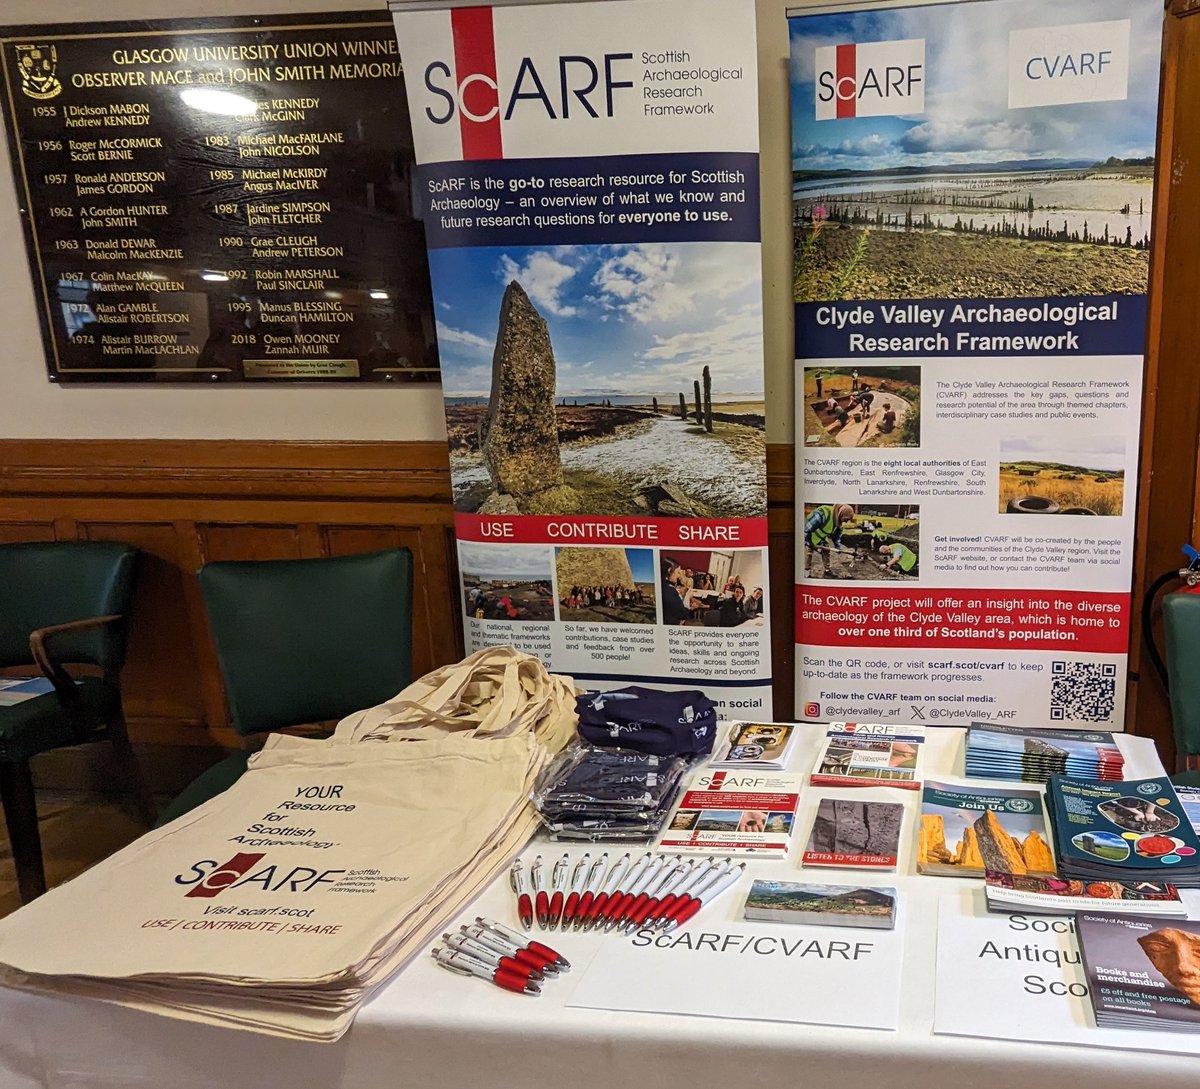 We are here at #SSASC24 at the lovely @UofGlasgow ready to chat all things @ClydeValley_ARF #scarf #socantscot Looks like a great day of talks ahead! #HESSupported